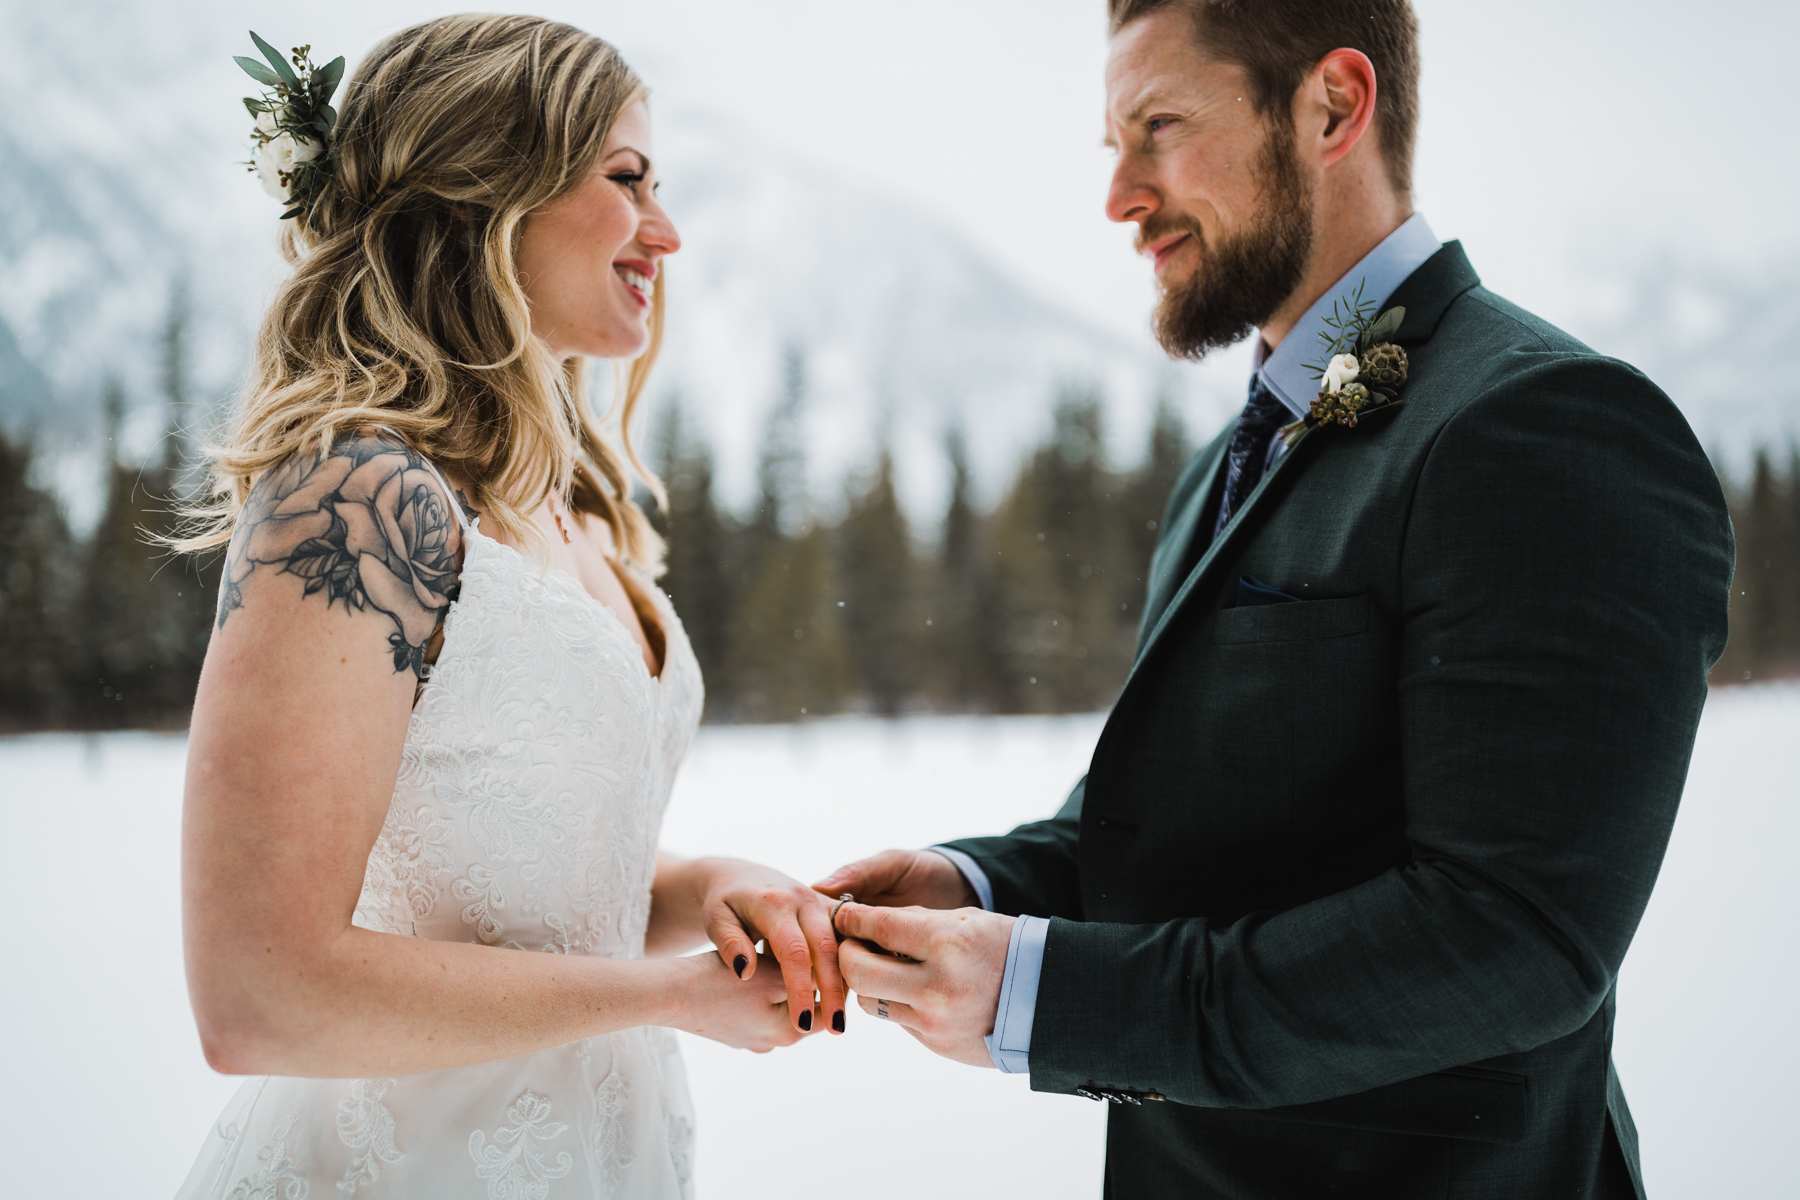 Canmore Elopement Photographer in the Canadian Rockies - Image 28